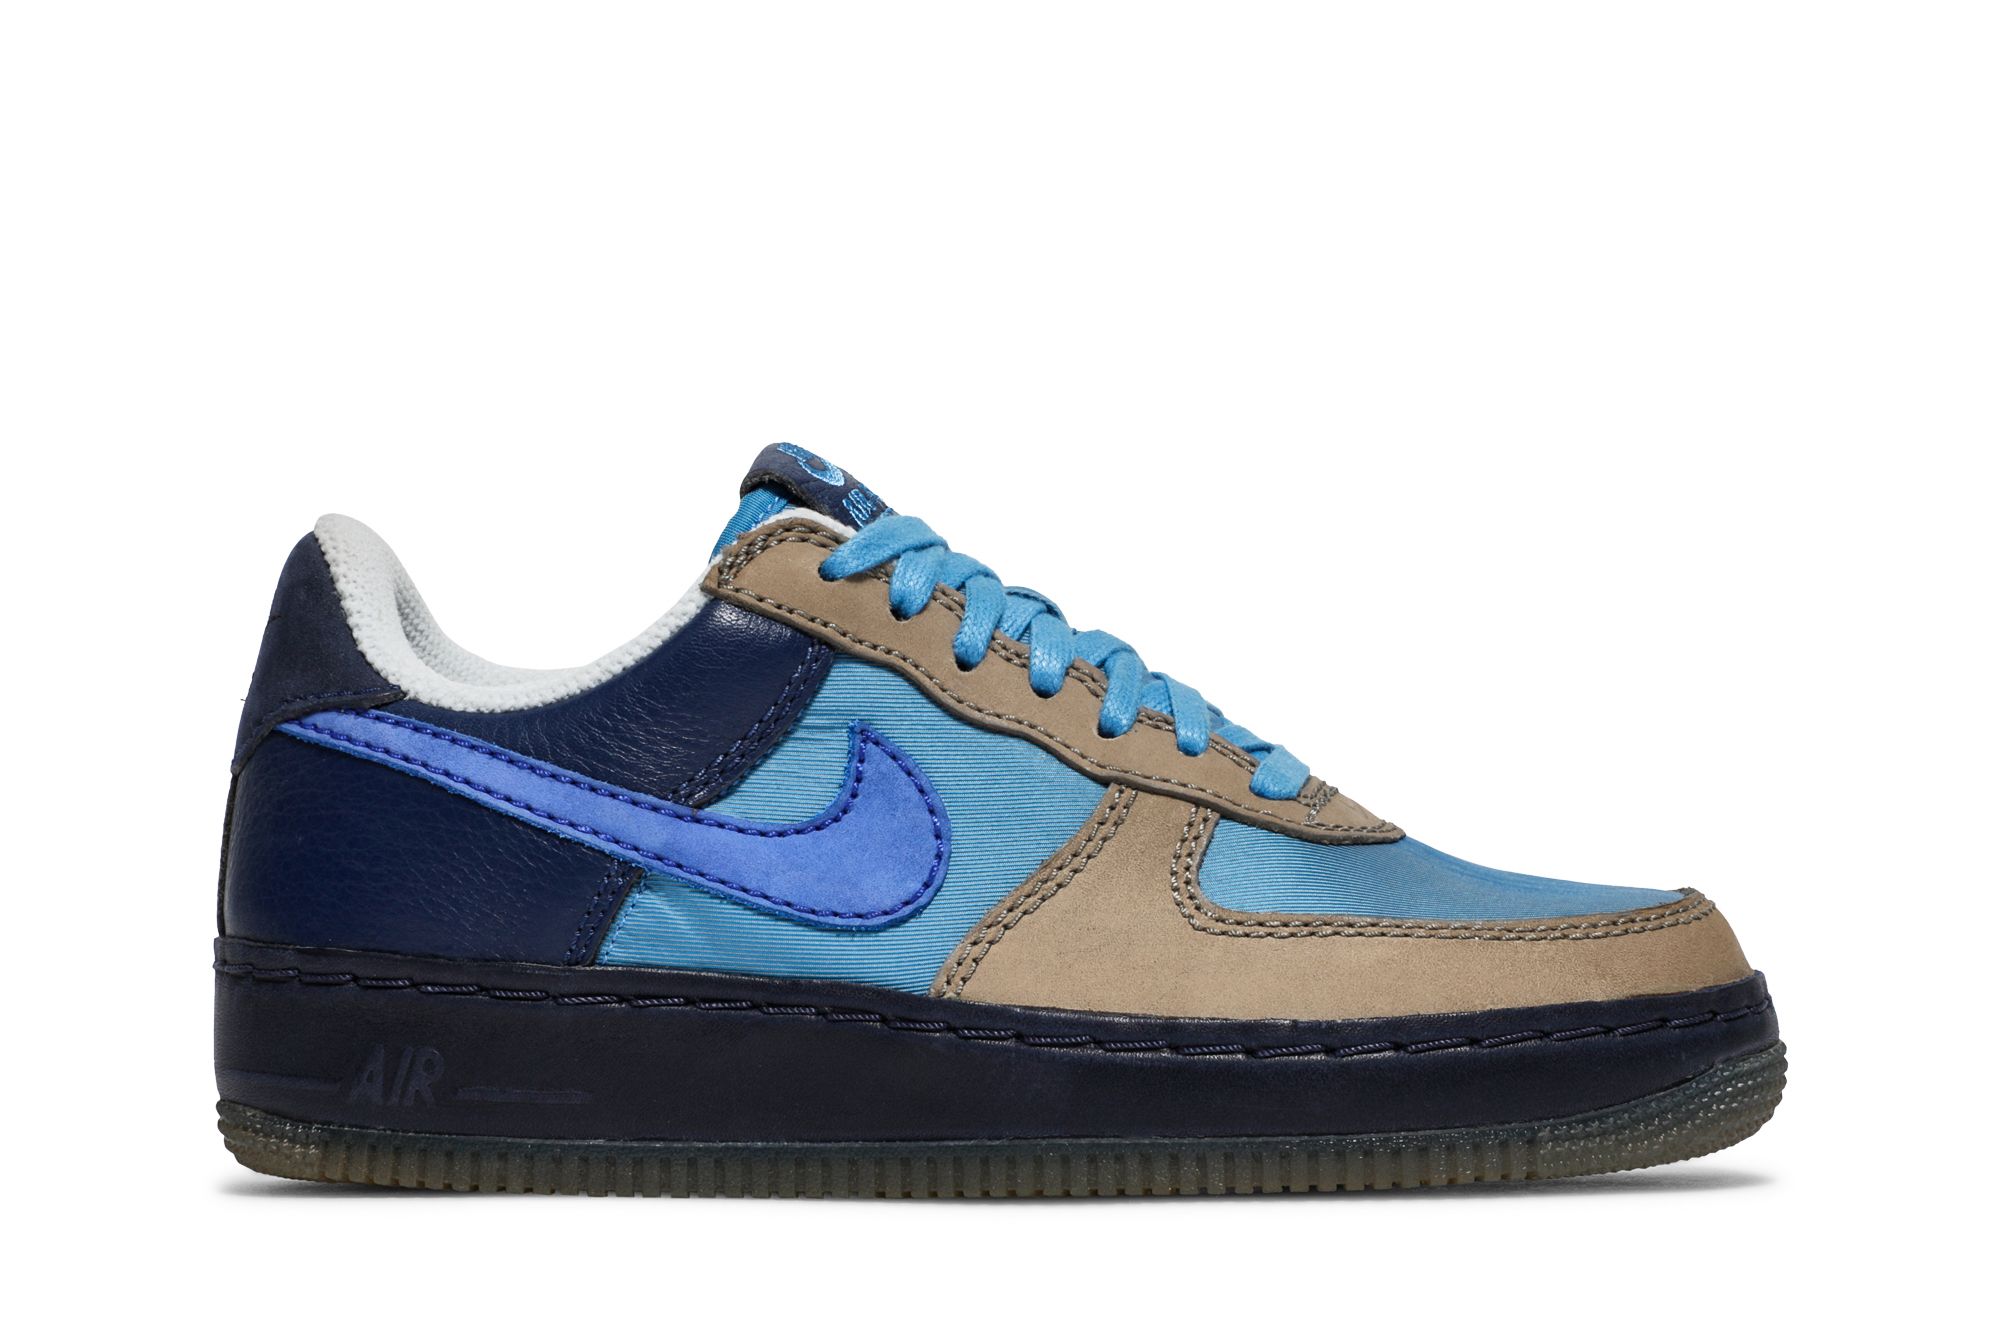 Nike has an Air Force 1 sneaker that's perfect for your grandpa